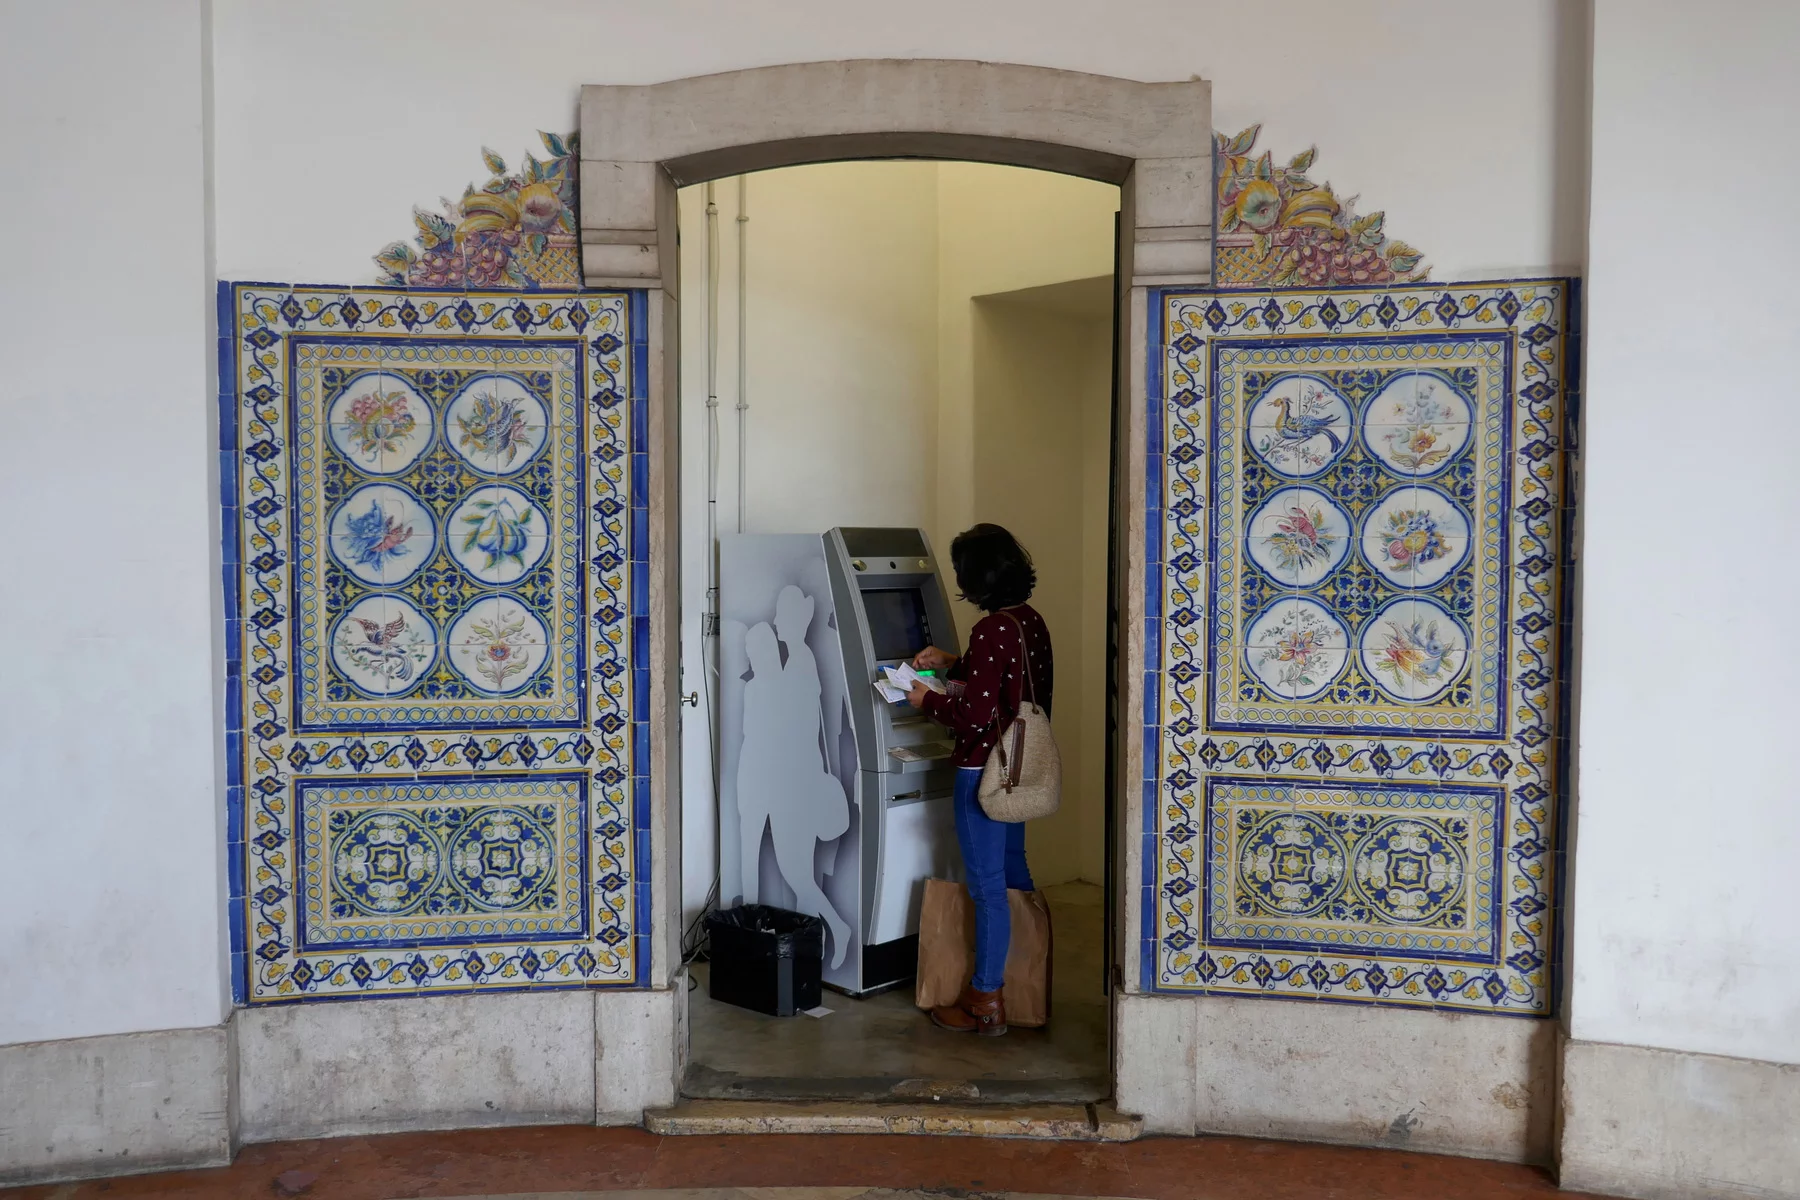 money transfer: a woman makes a withdrawal at a cash machine in Lisbon, Portugal